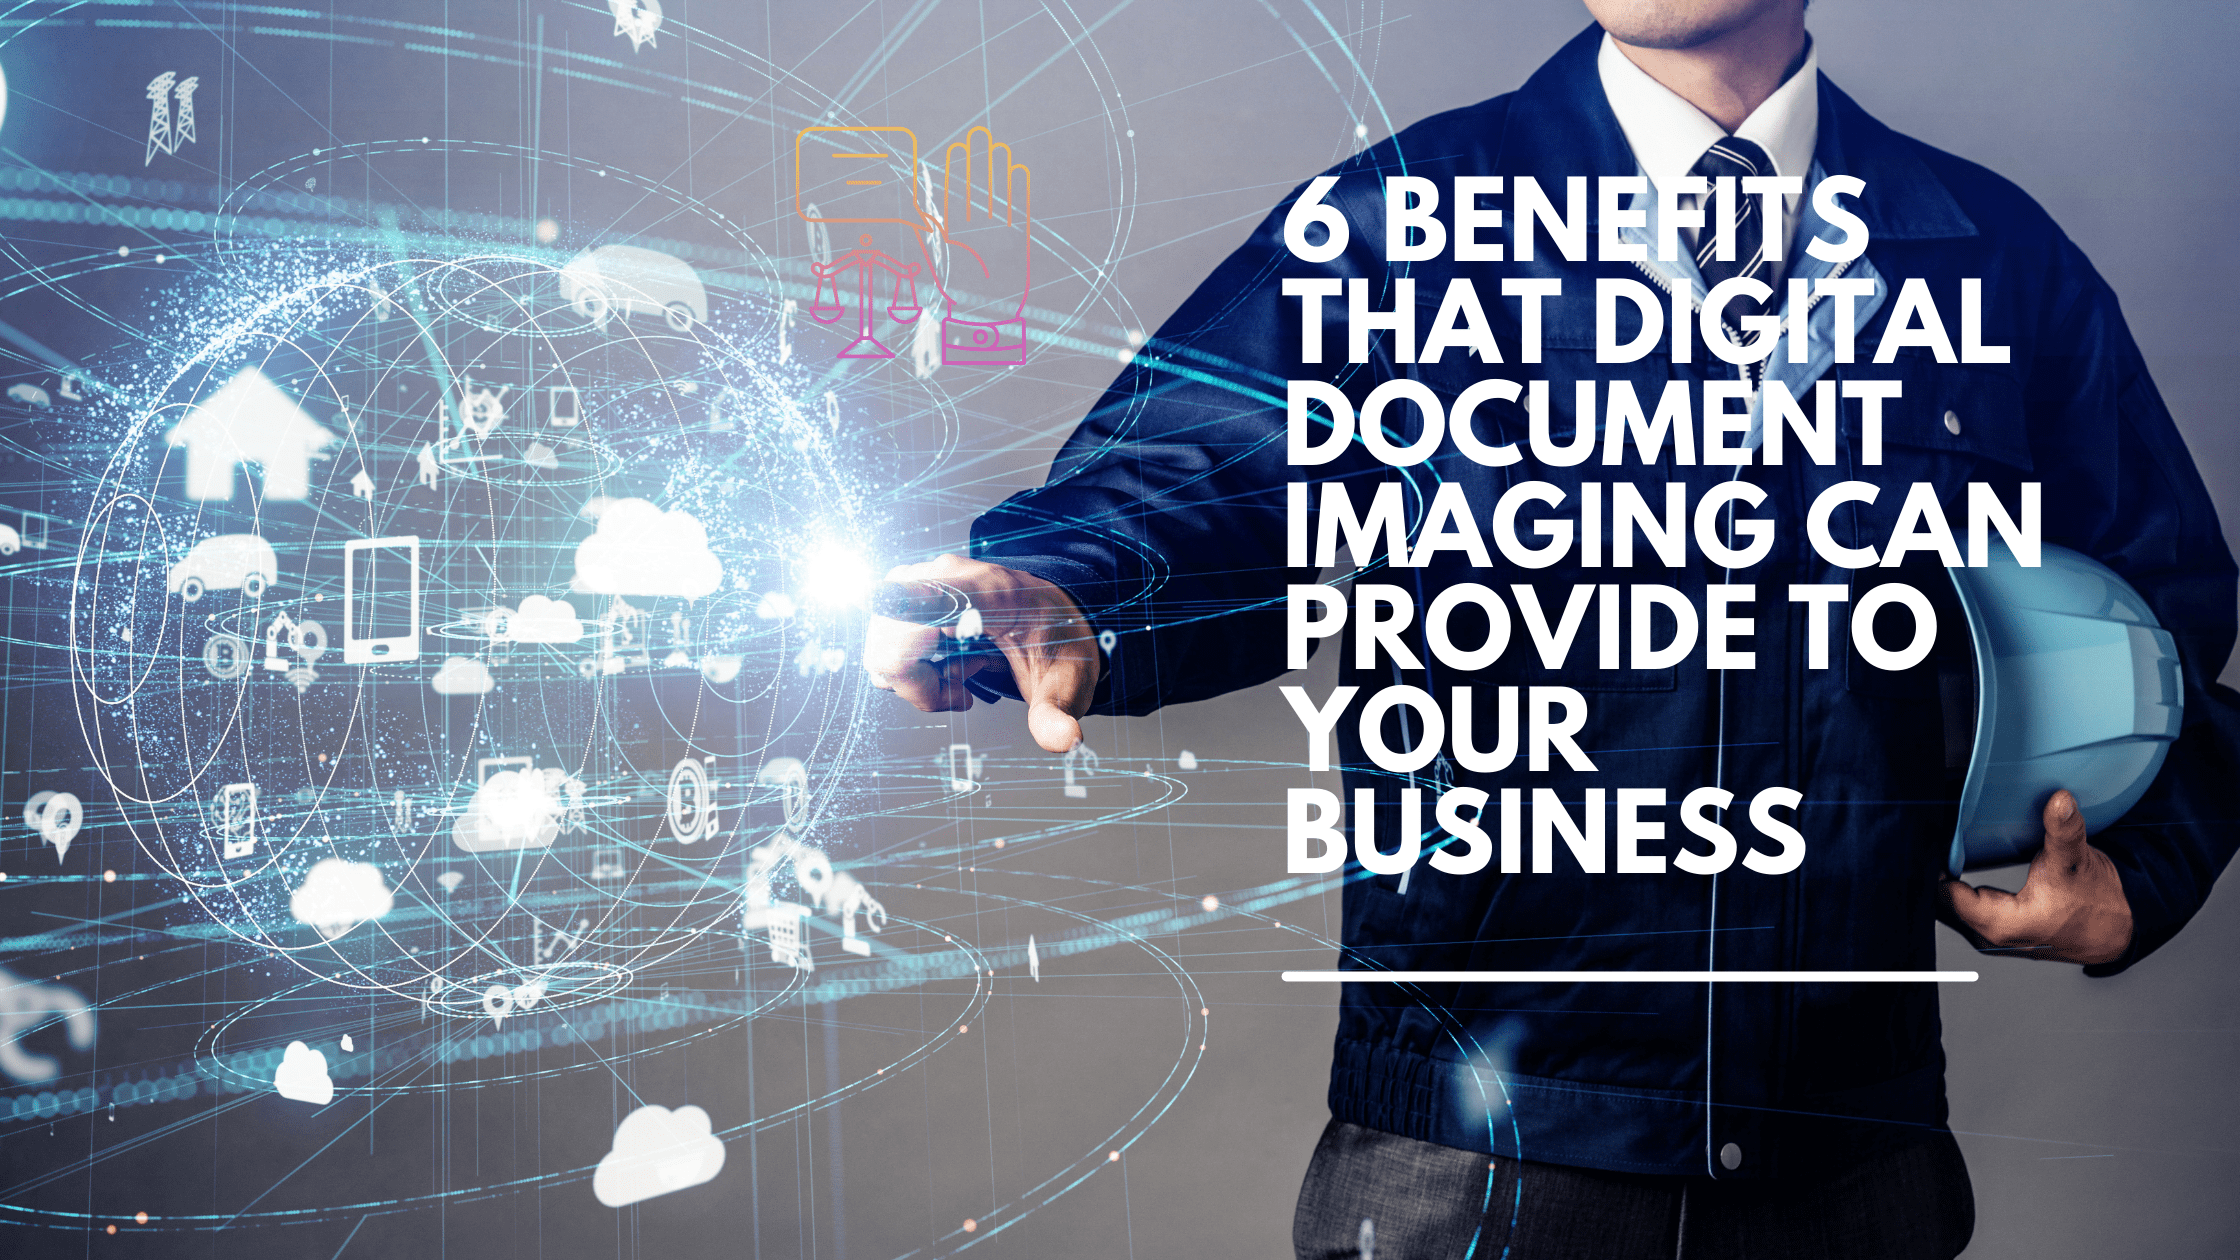 6 Benefits That Digital Document Imaging Can Provide To Your Business